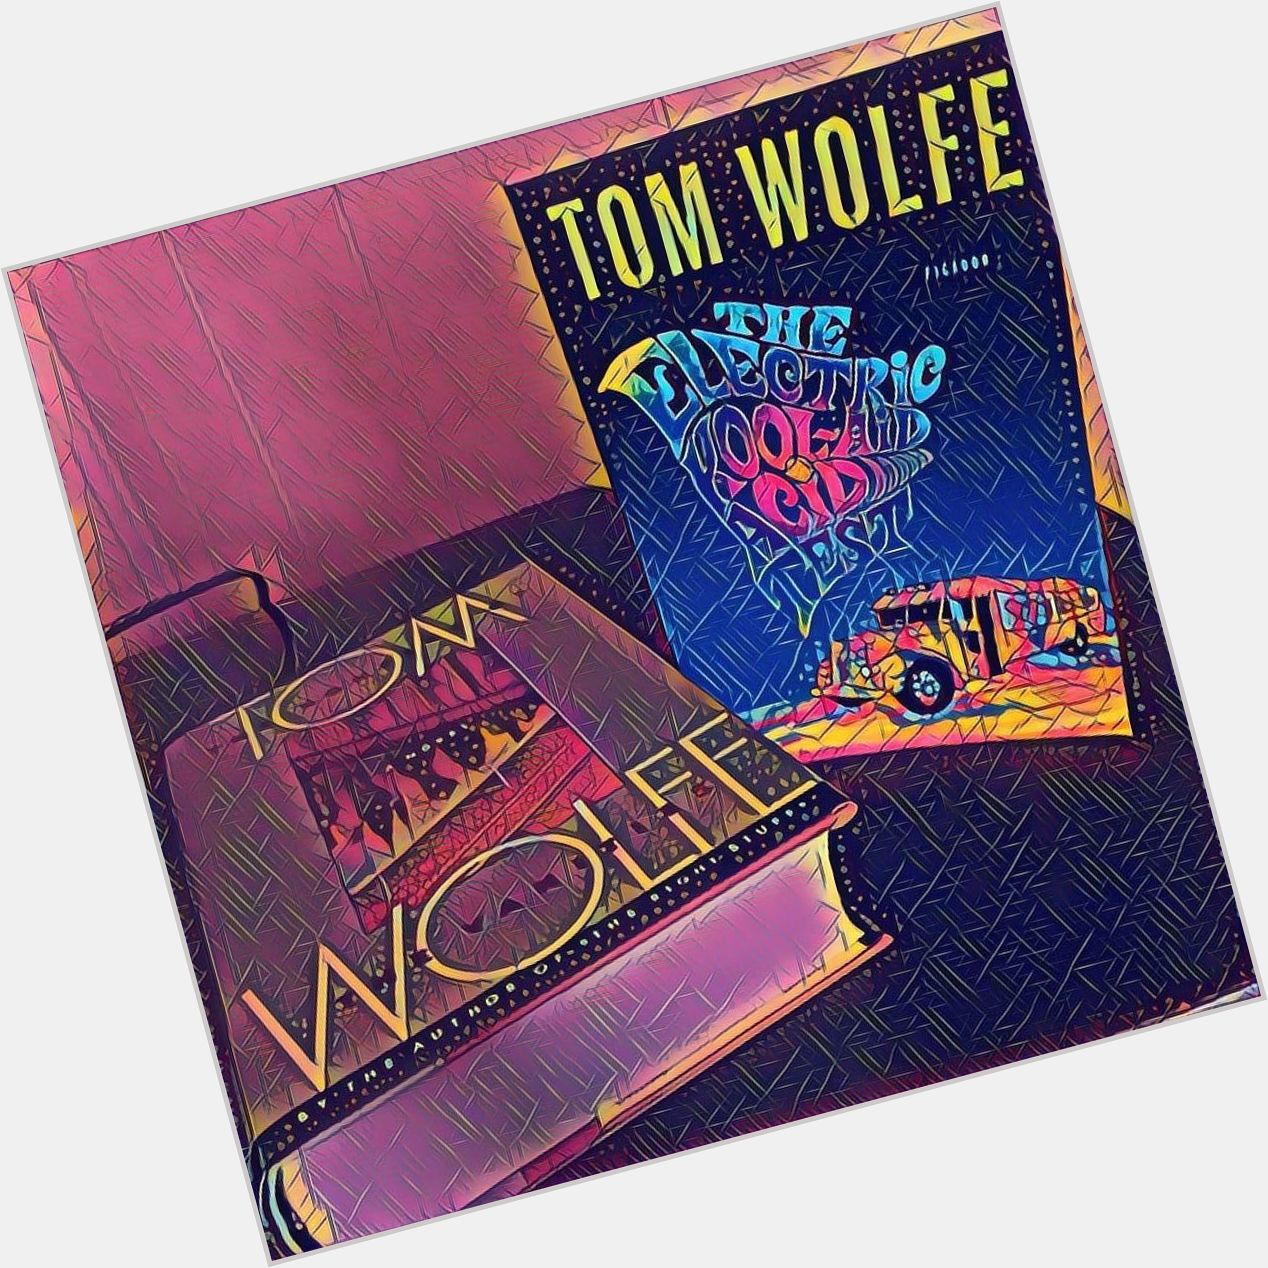 Happy birthday Tom Wolfe! The novelist and journalist was born in 1931.  